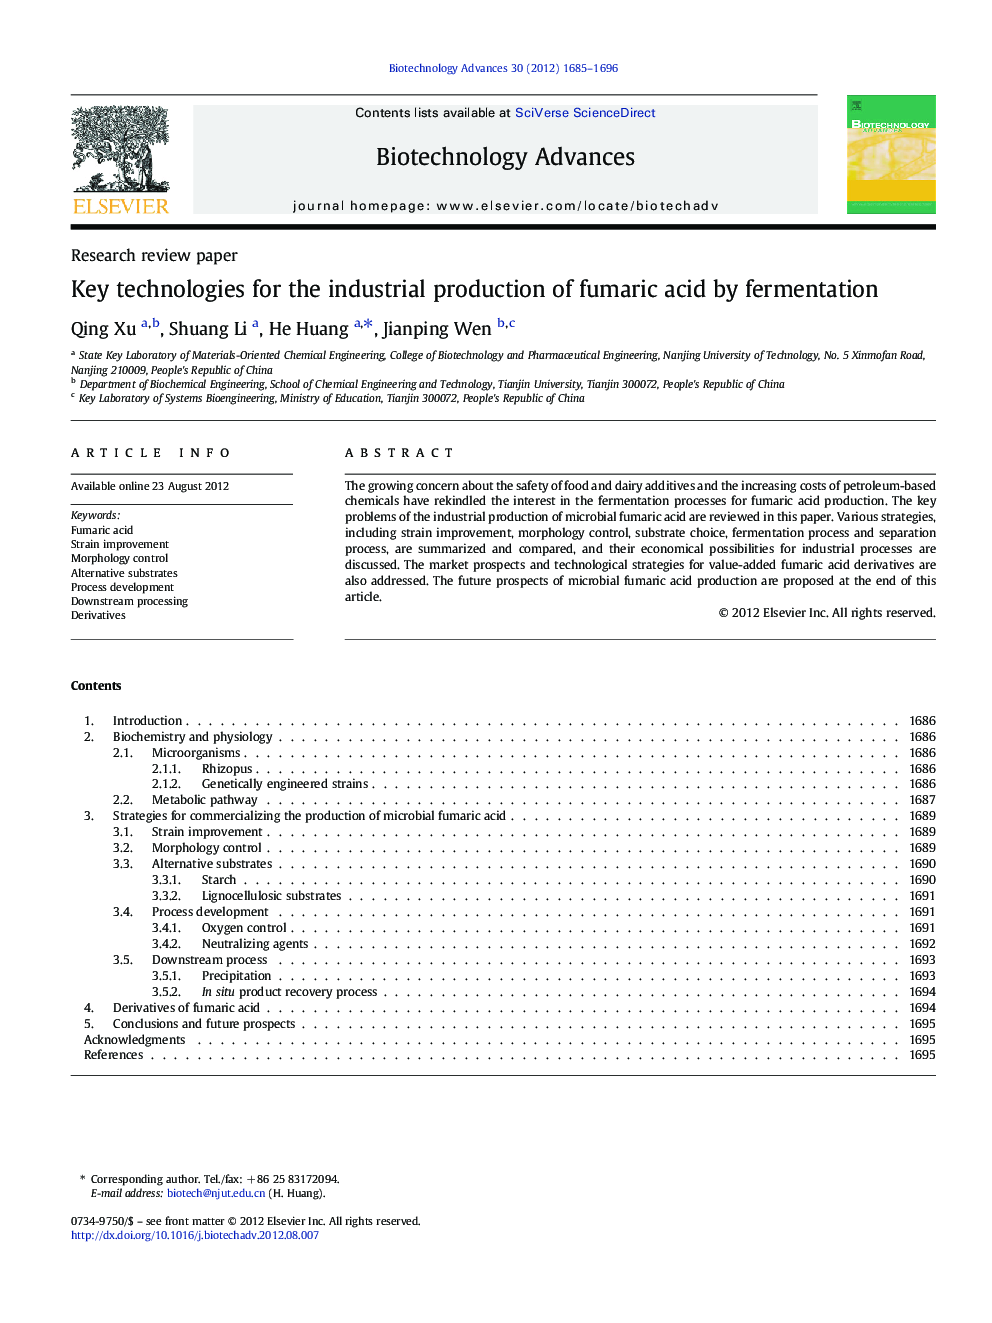 Key technologies for the industrial production of fumaric acid by fermentation